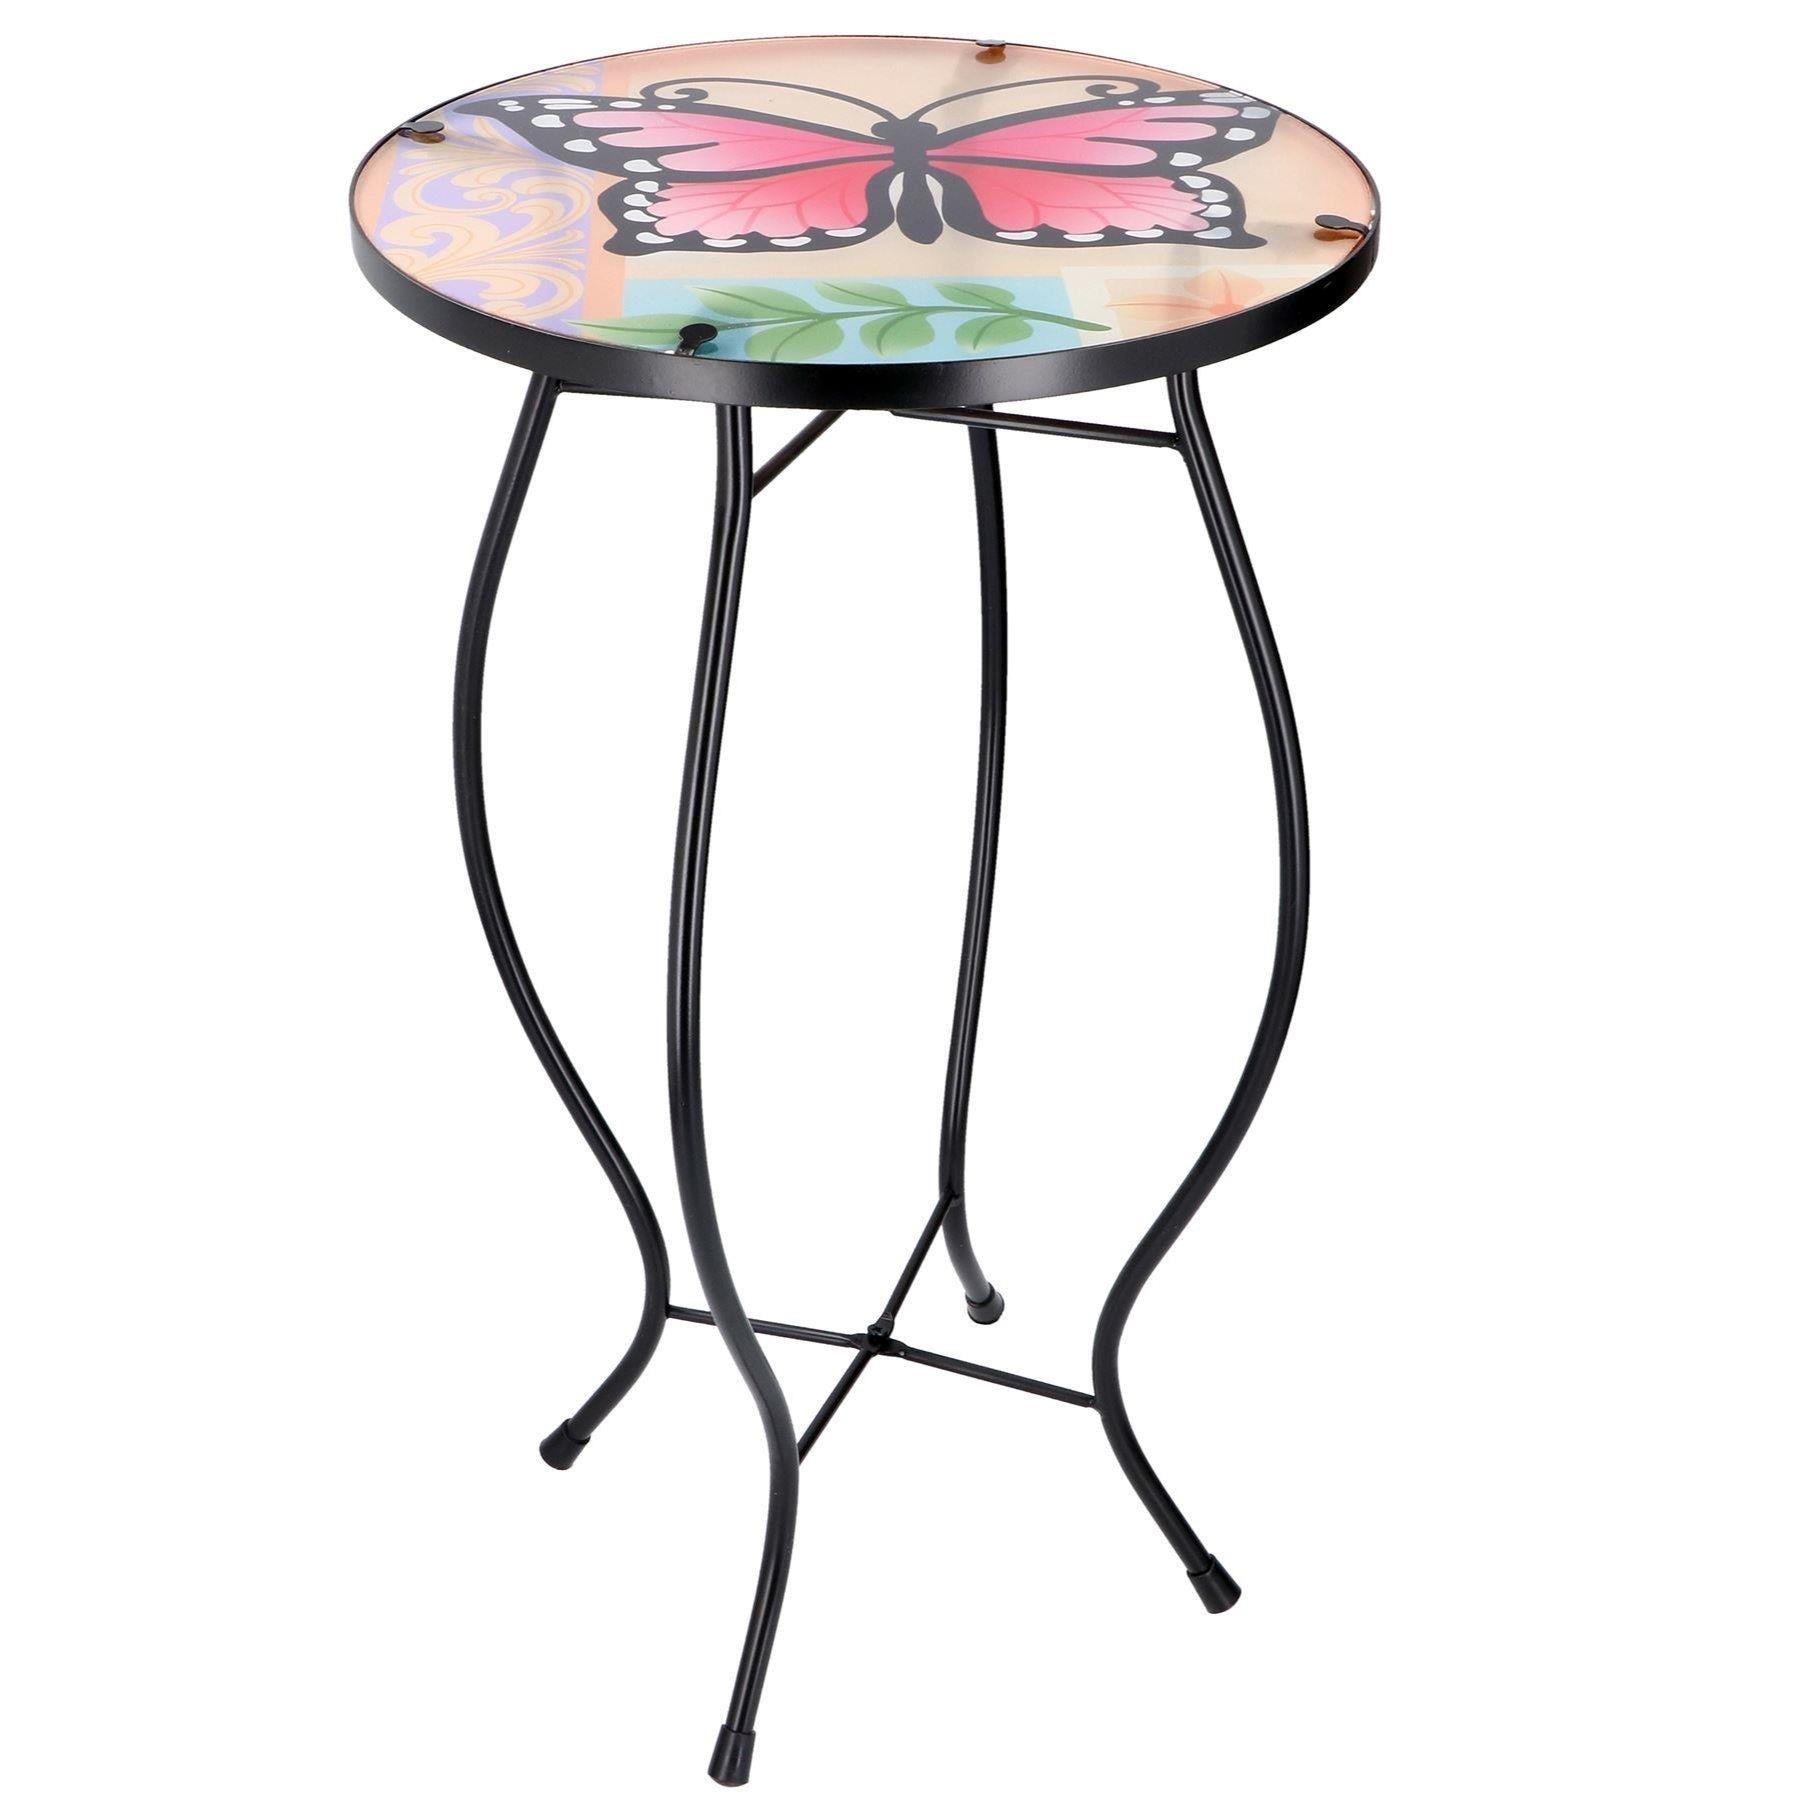 GEEZY table Round Side Mosaic Table With Large Butterfly Design